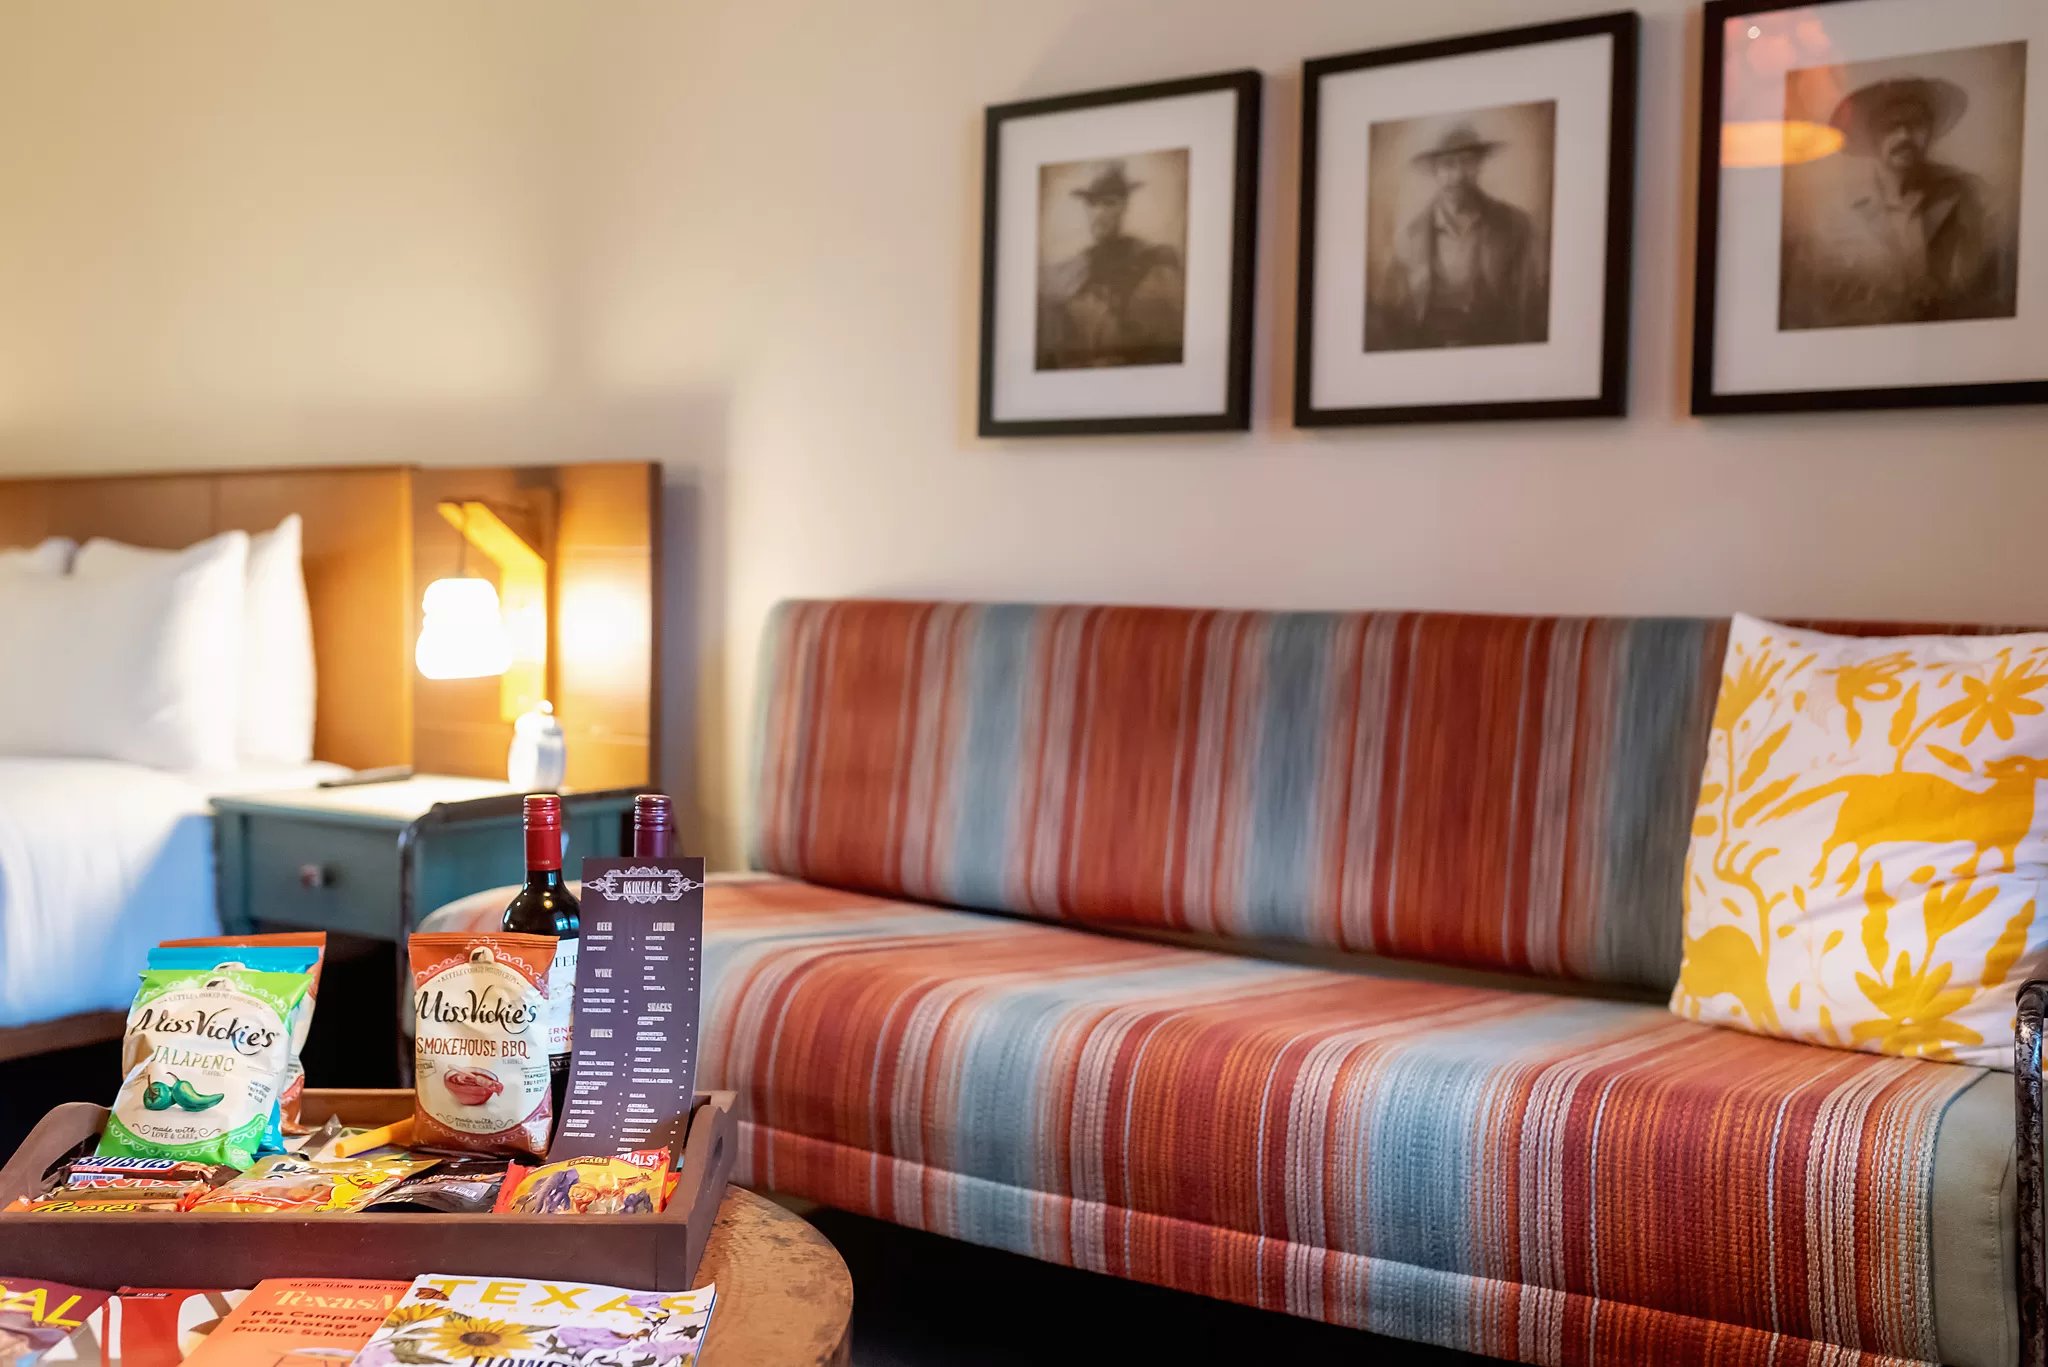 King Room at the Texican Court. Photo shows the couch with brightly colored textiles on it and some mini bar style snacks for purchase